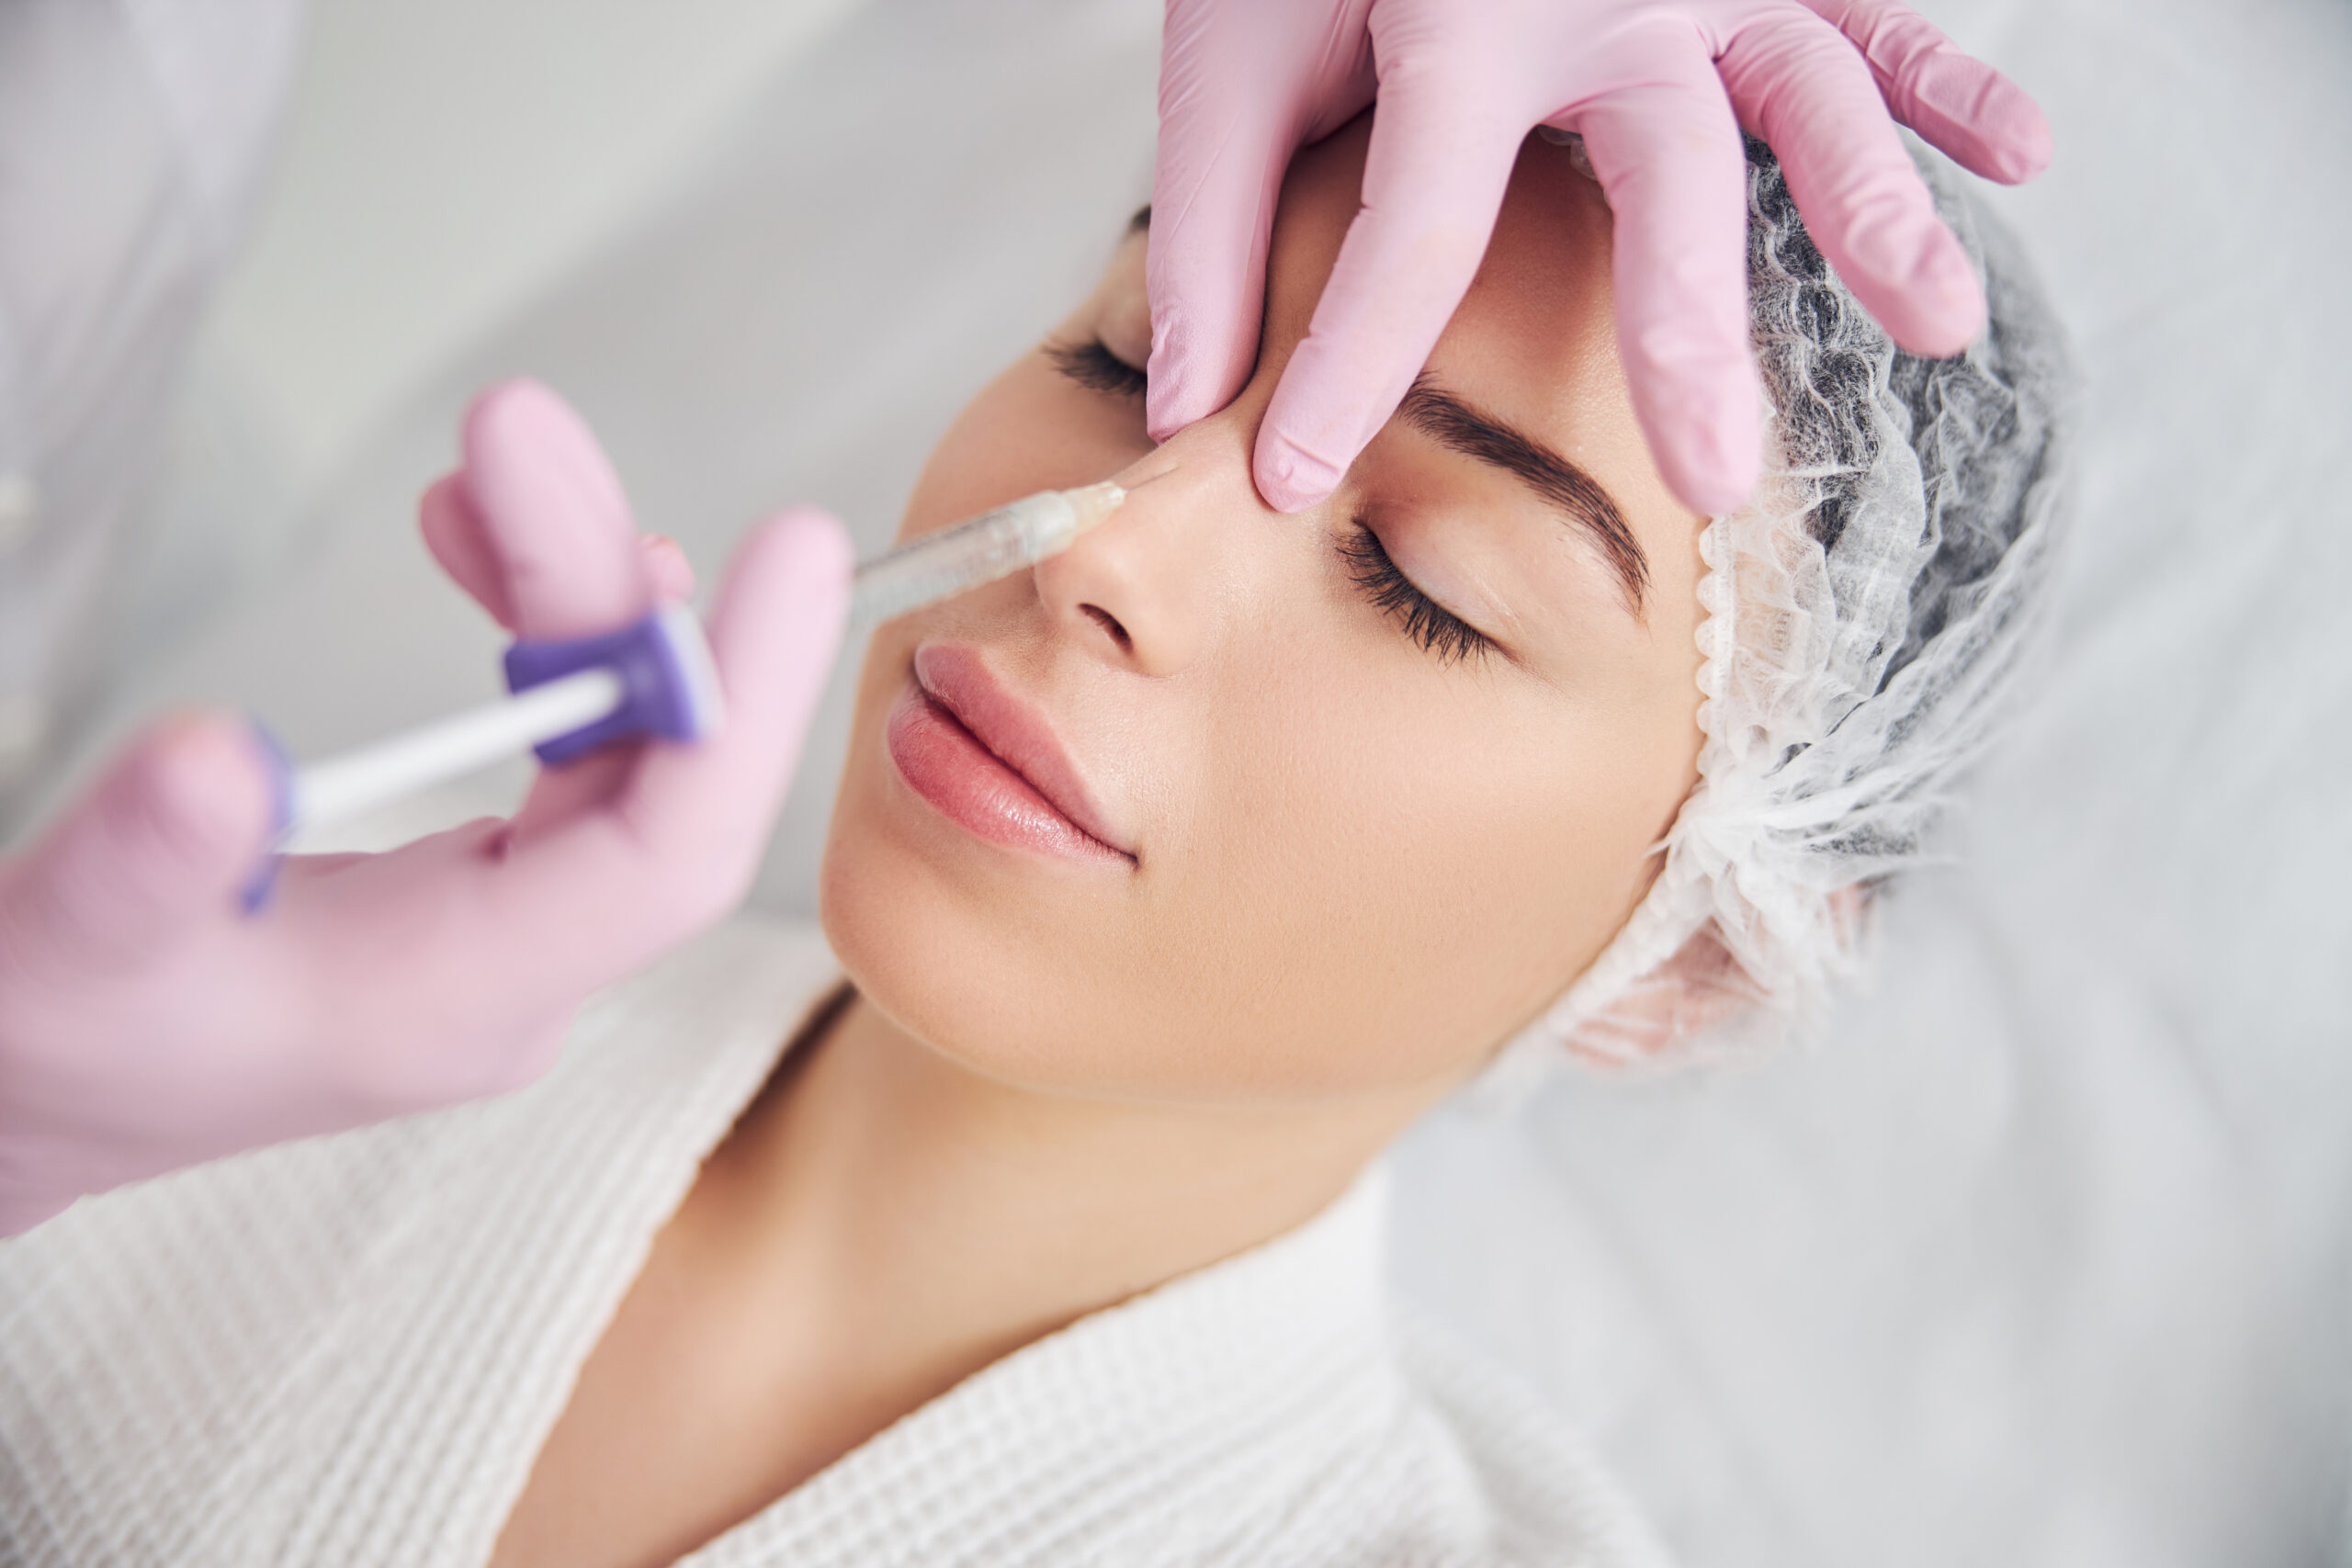 Discover the 5-Minute Nose Job: Liquid Rhinoplasty at The Laser Lounge Spa Naples